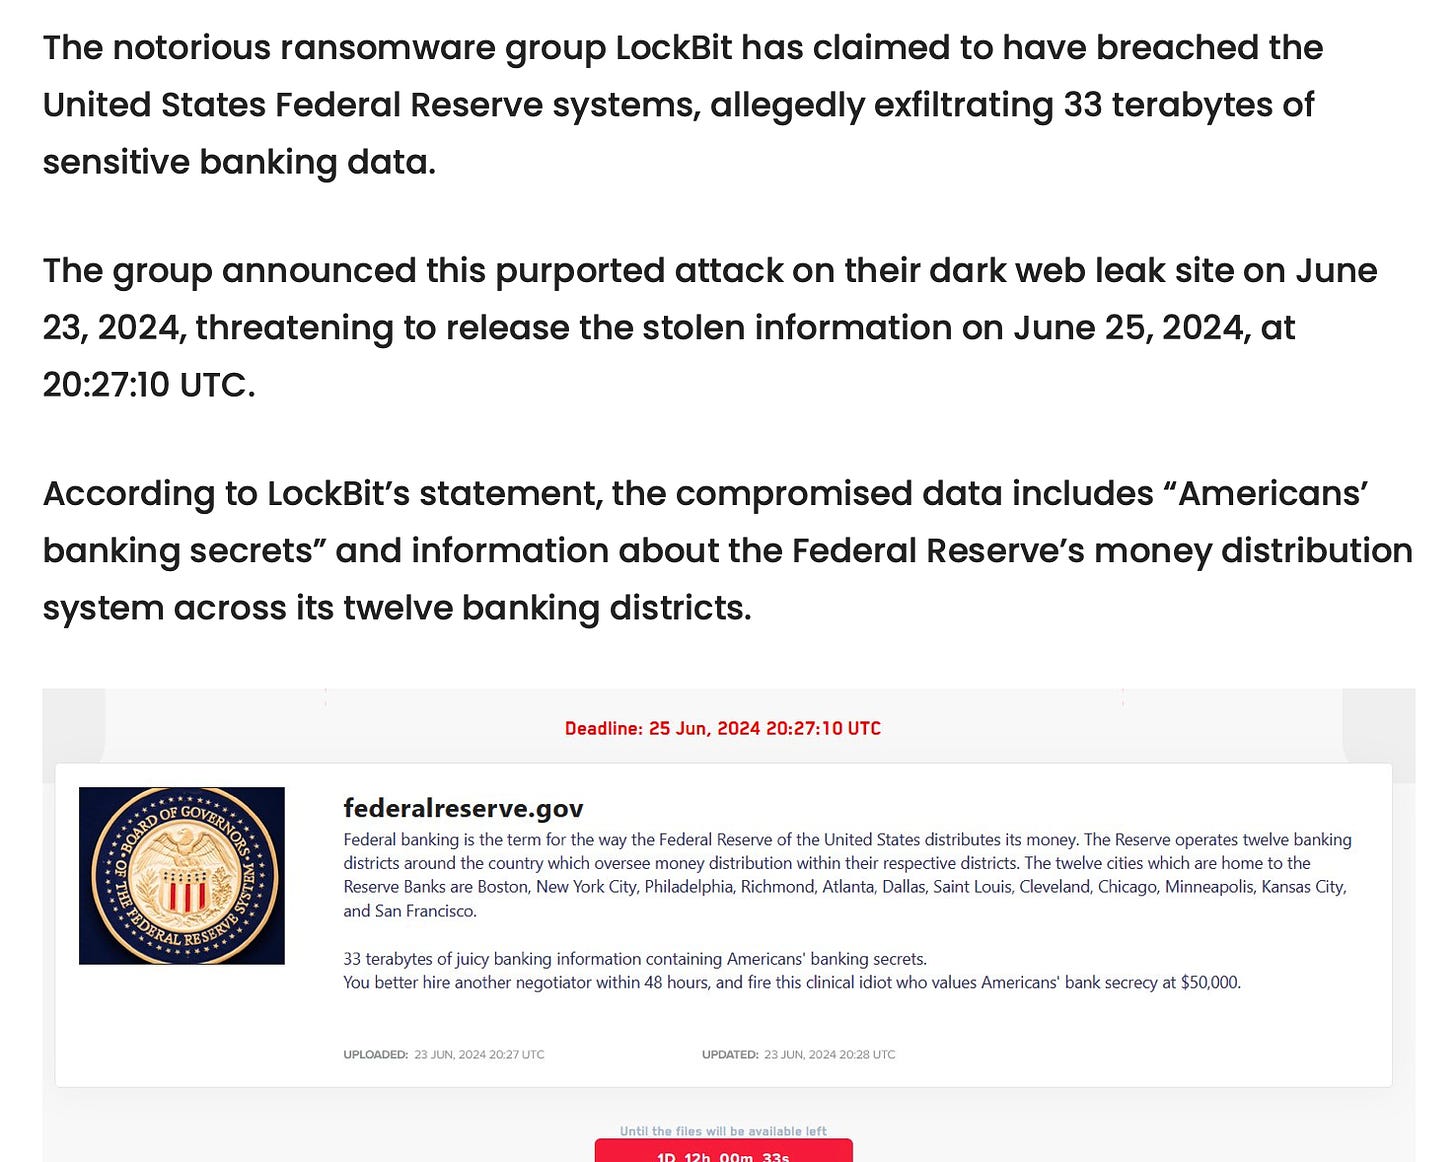 Ransomware Group “LockBit” Claims To Have Breached US Federal Reserve, Says It Exfiltrated 33 Terabytes Of “Americans Banking Secrets”